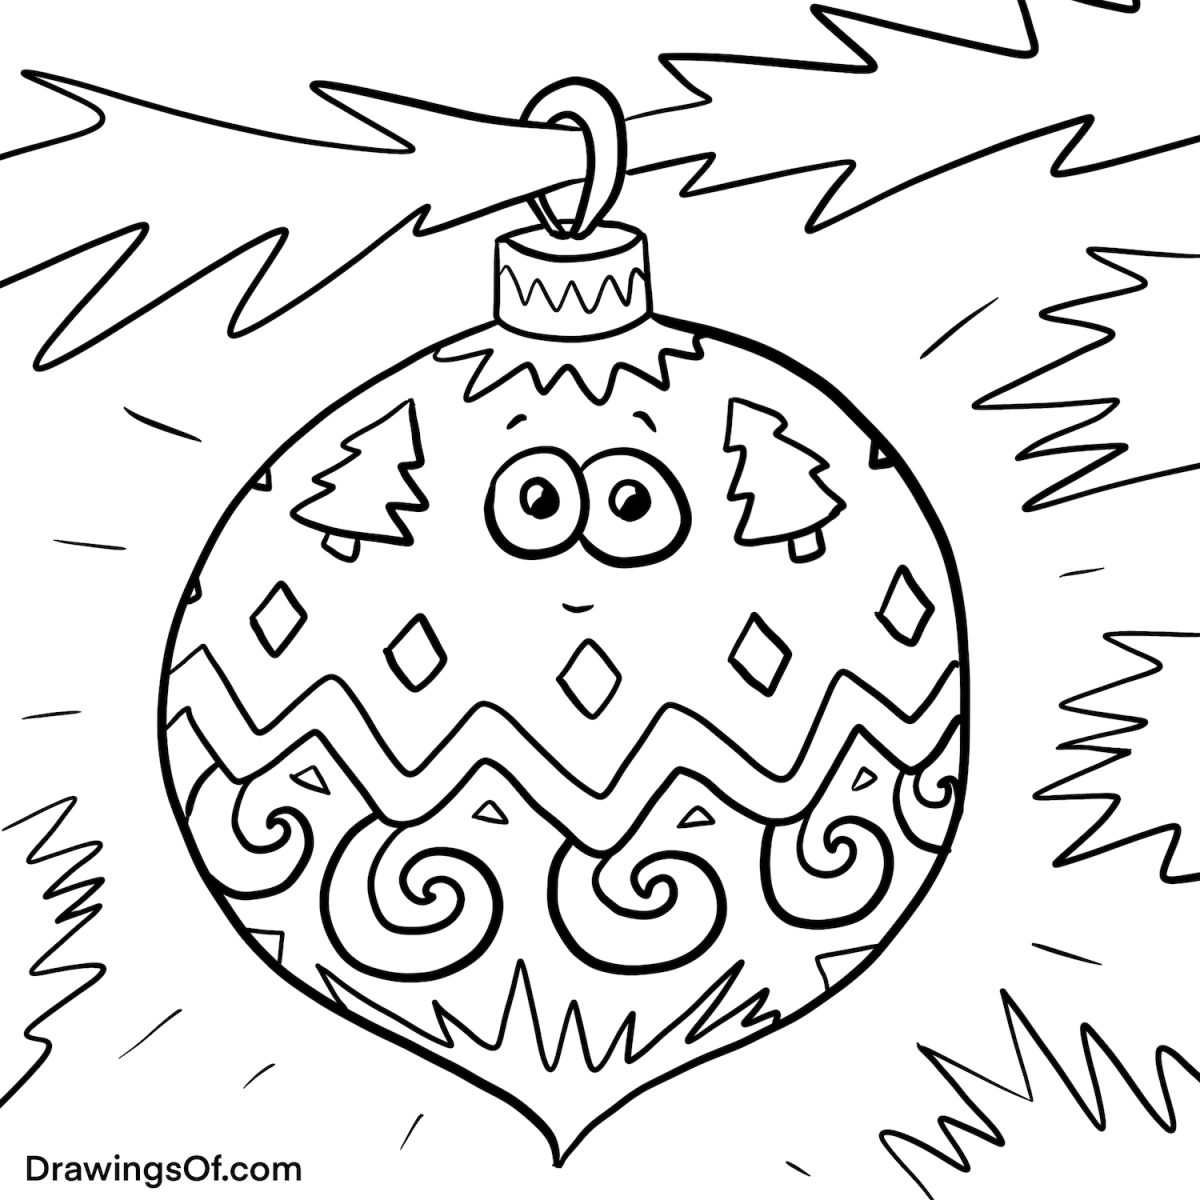 Ornament drawing easy line